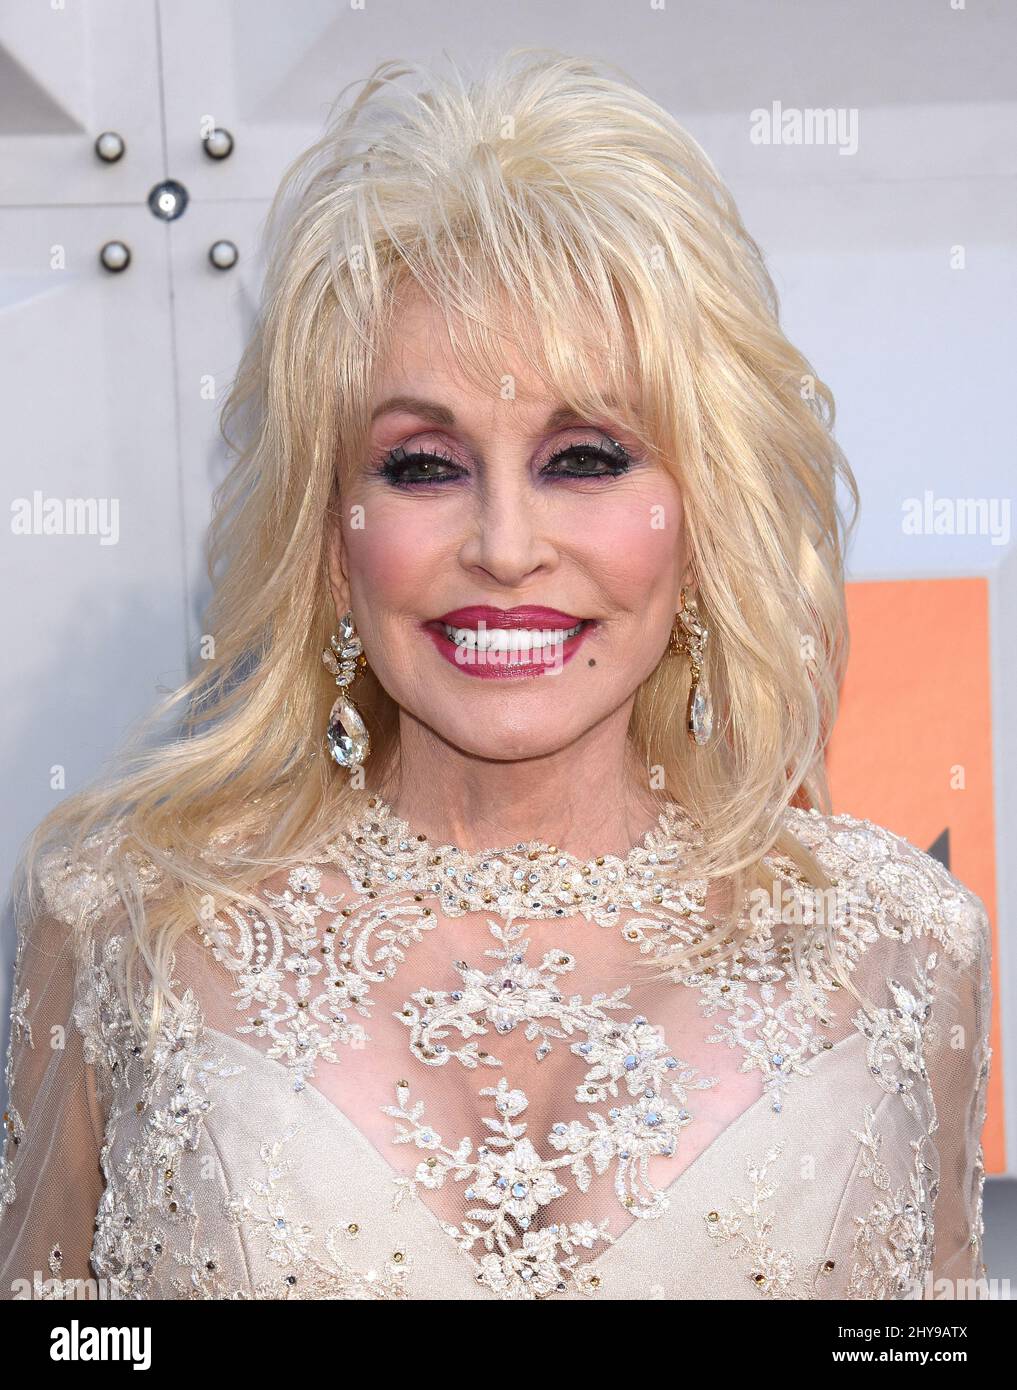 Dolly Parton arrives at the 51st annual Academy of Country Music Awards at the MGM Grand Garden Arena on Sunday, April 3, 2016, in Las Vegas. Stock Photo